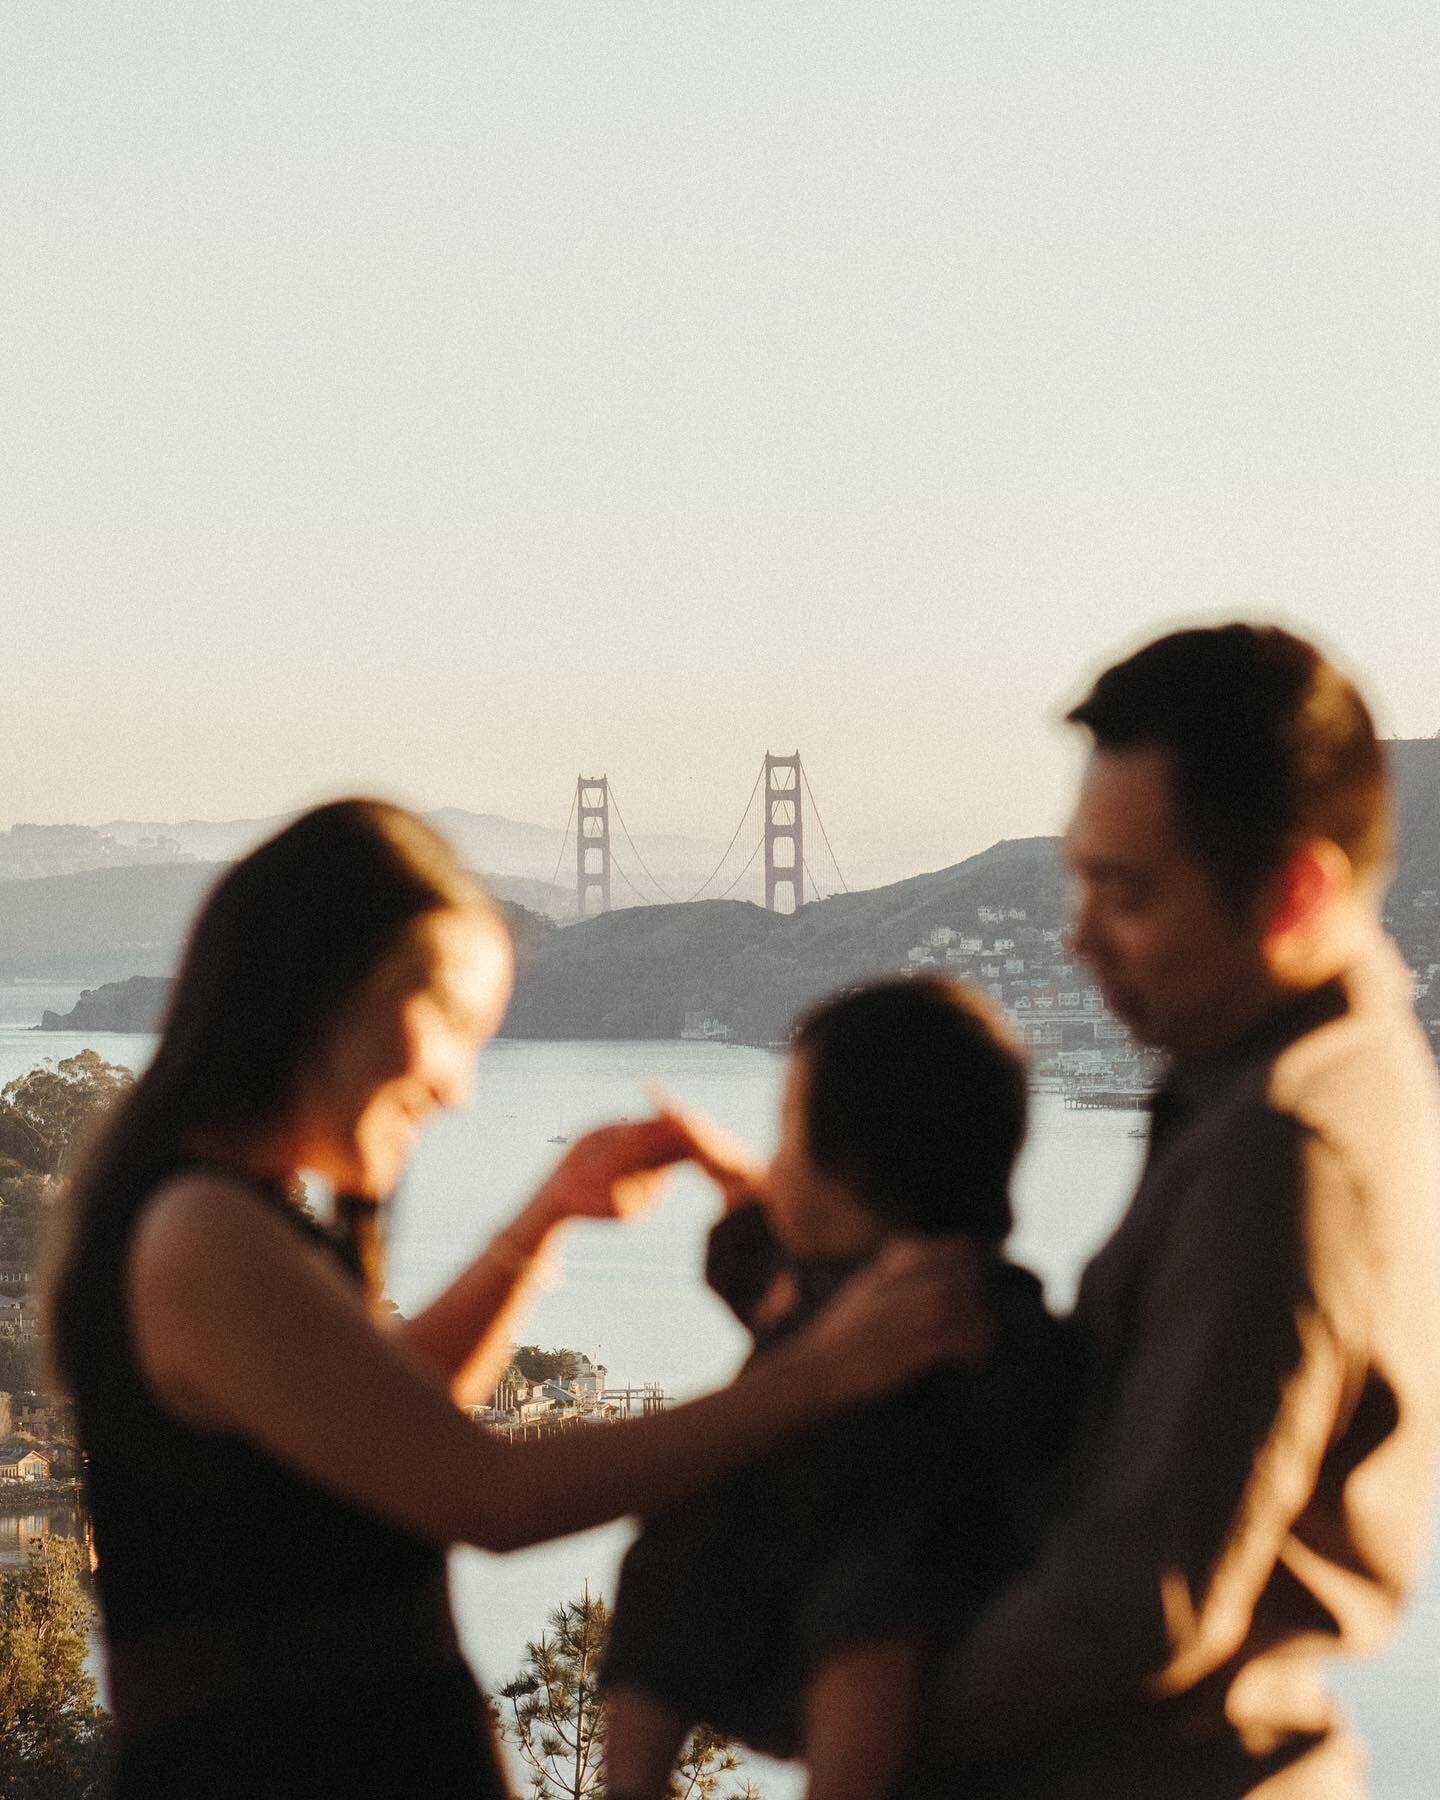 A family of three, with a blurred foreground of a couple and a child, sharing a cheerful moment during their family photoshoot against a backdrop of the golden gate bridge and blue sky in San Francisco.